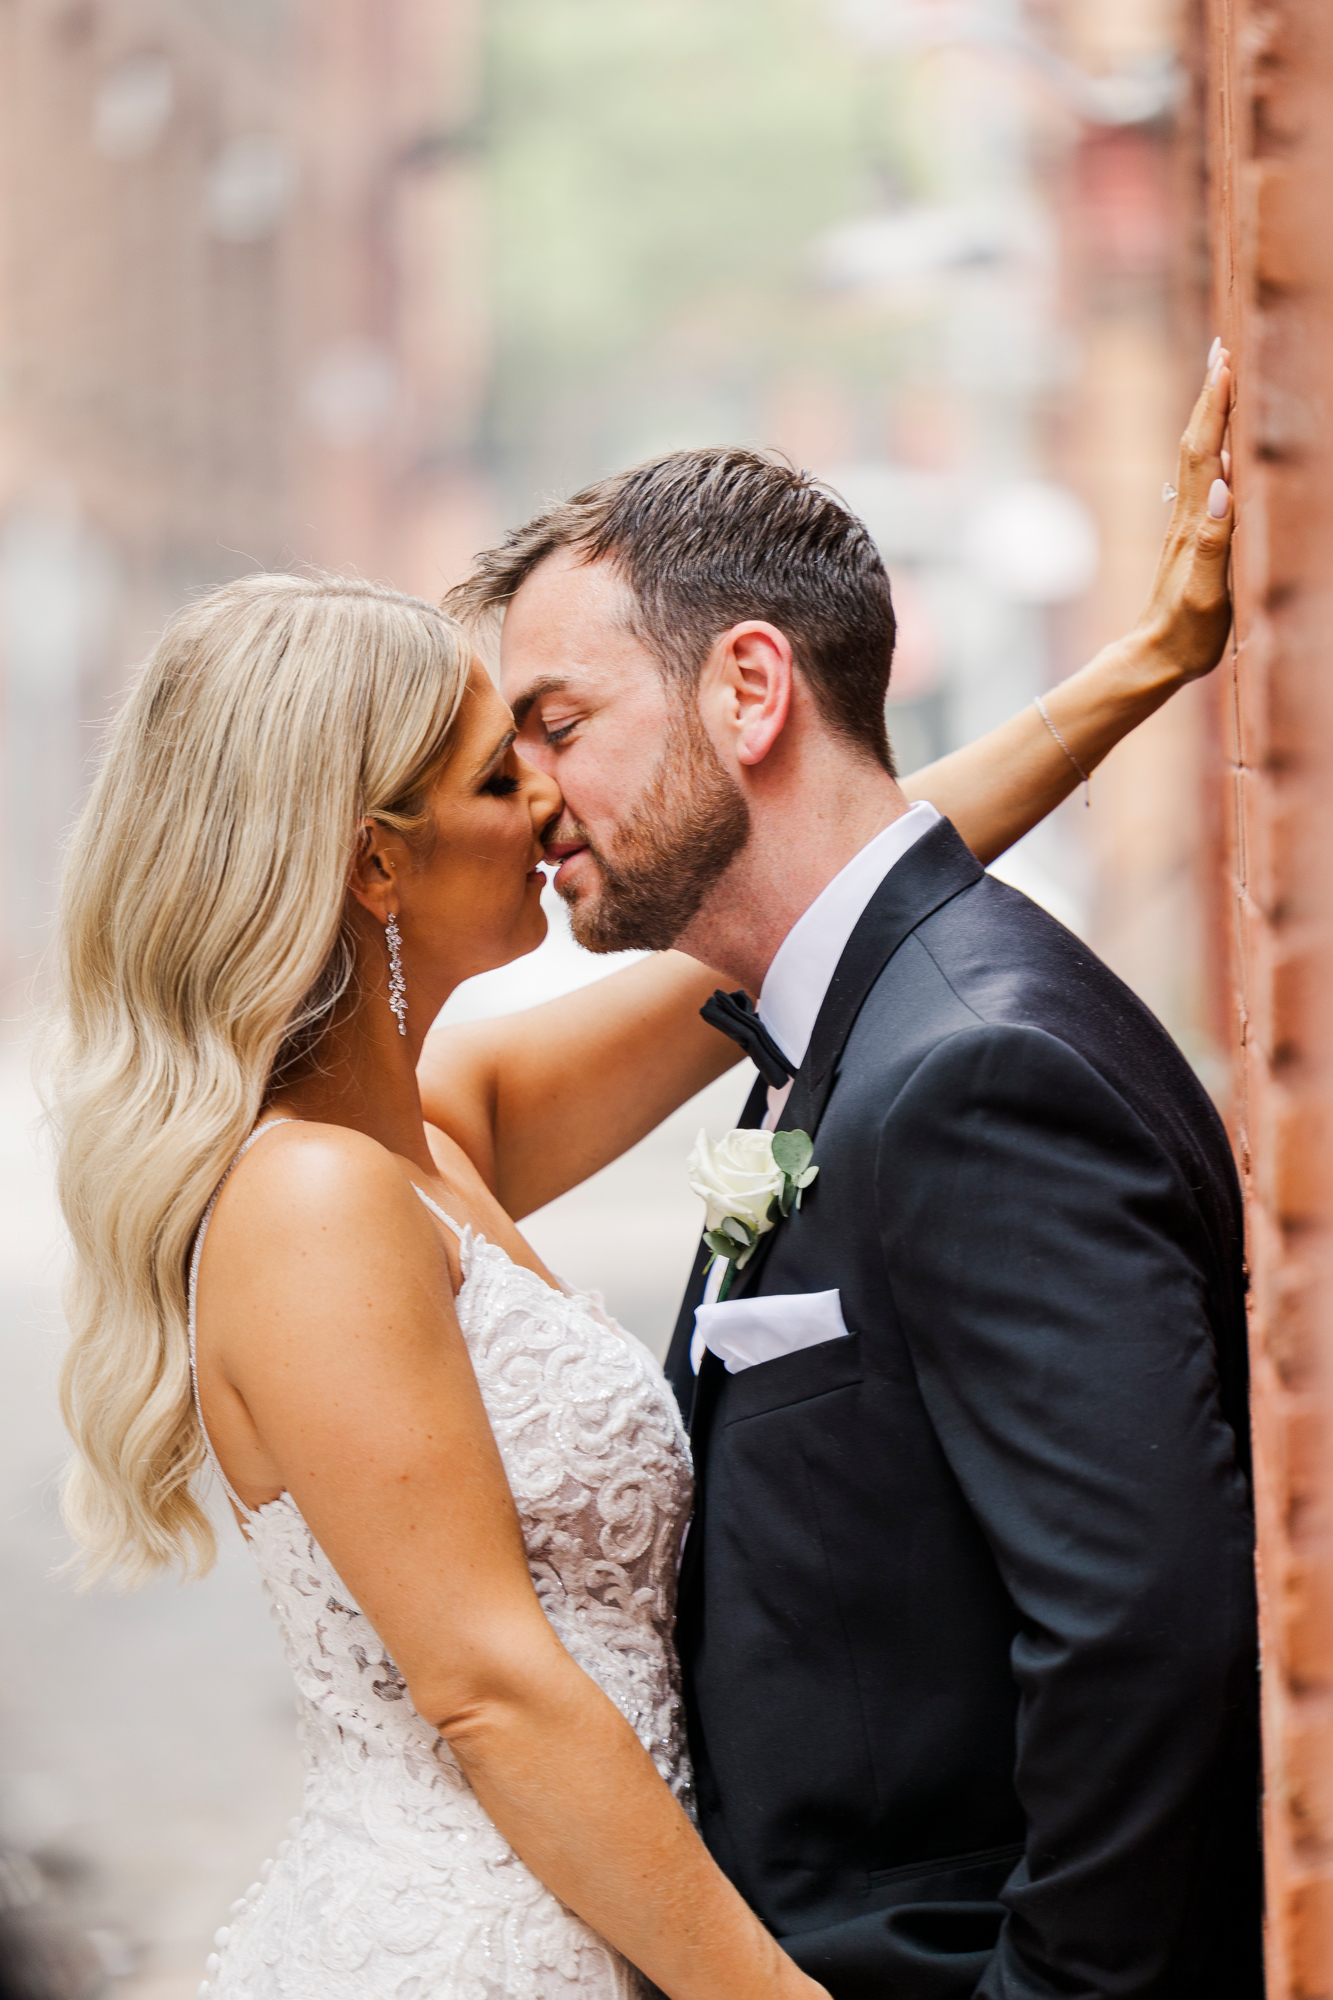 Playful Photo Gallery of Tribeca Rooftop Wedding